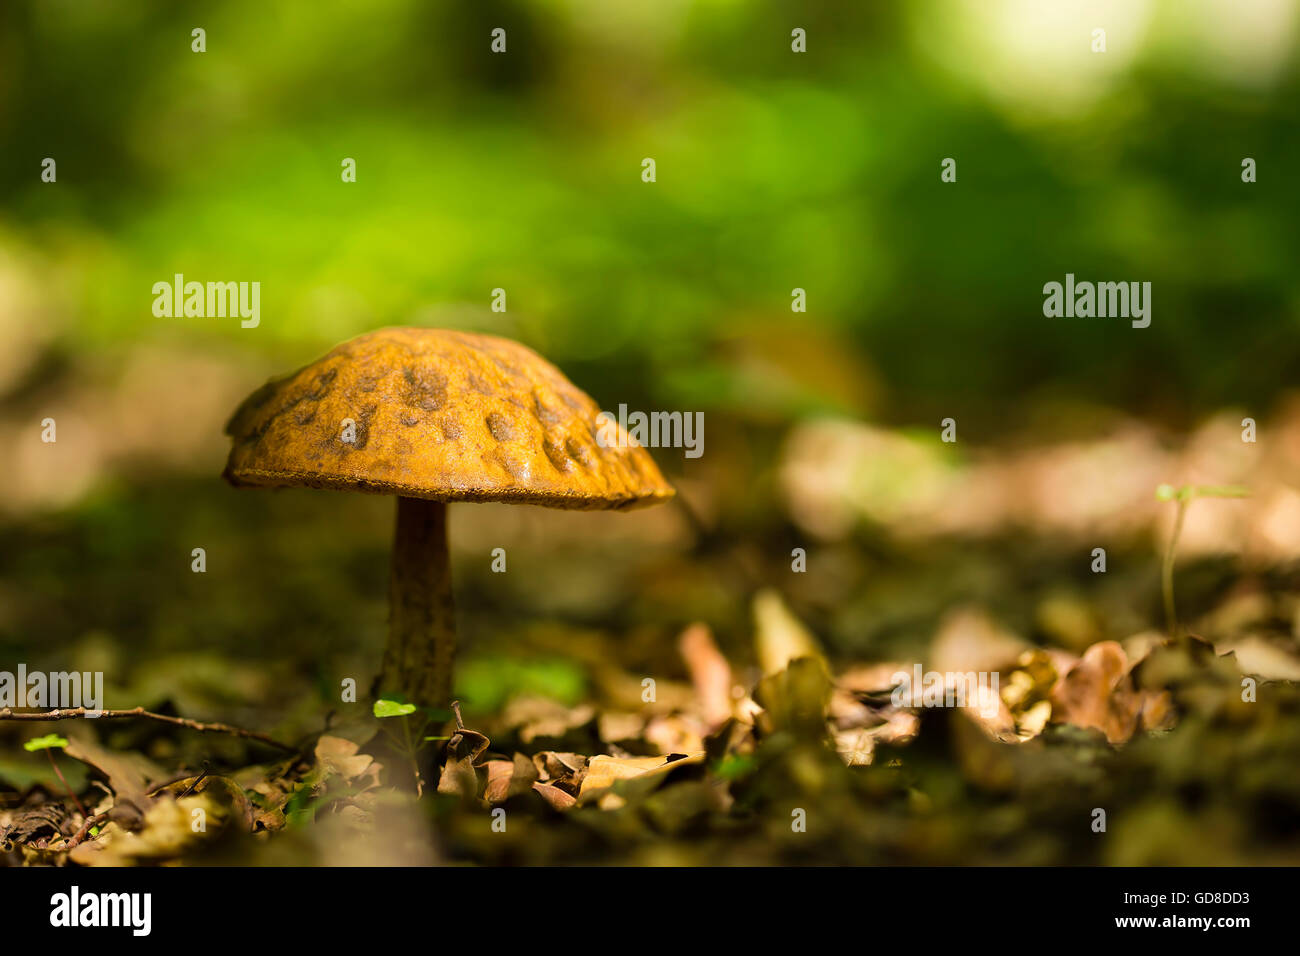 Lonley small mushroom in the forest Stock Photo